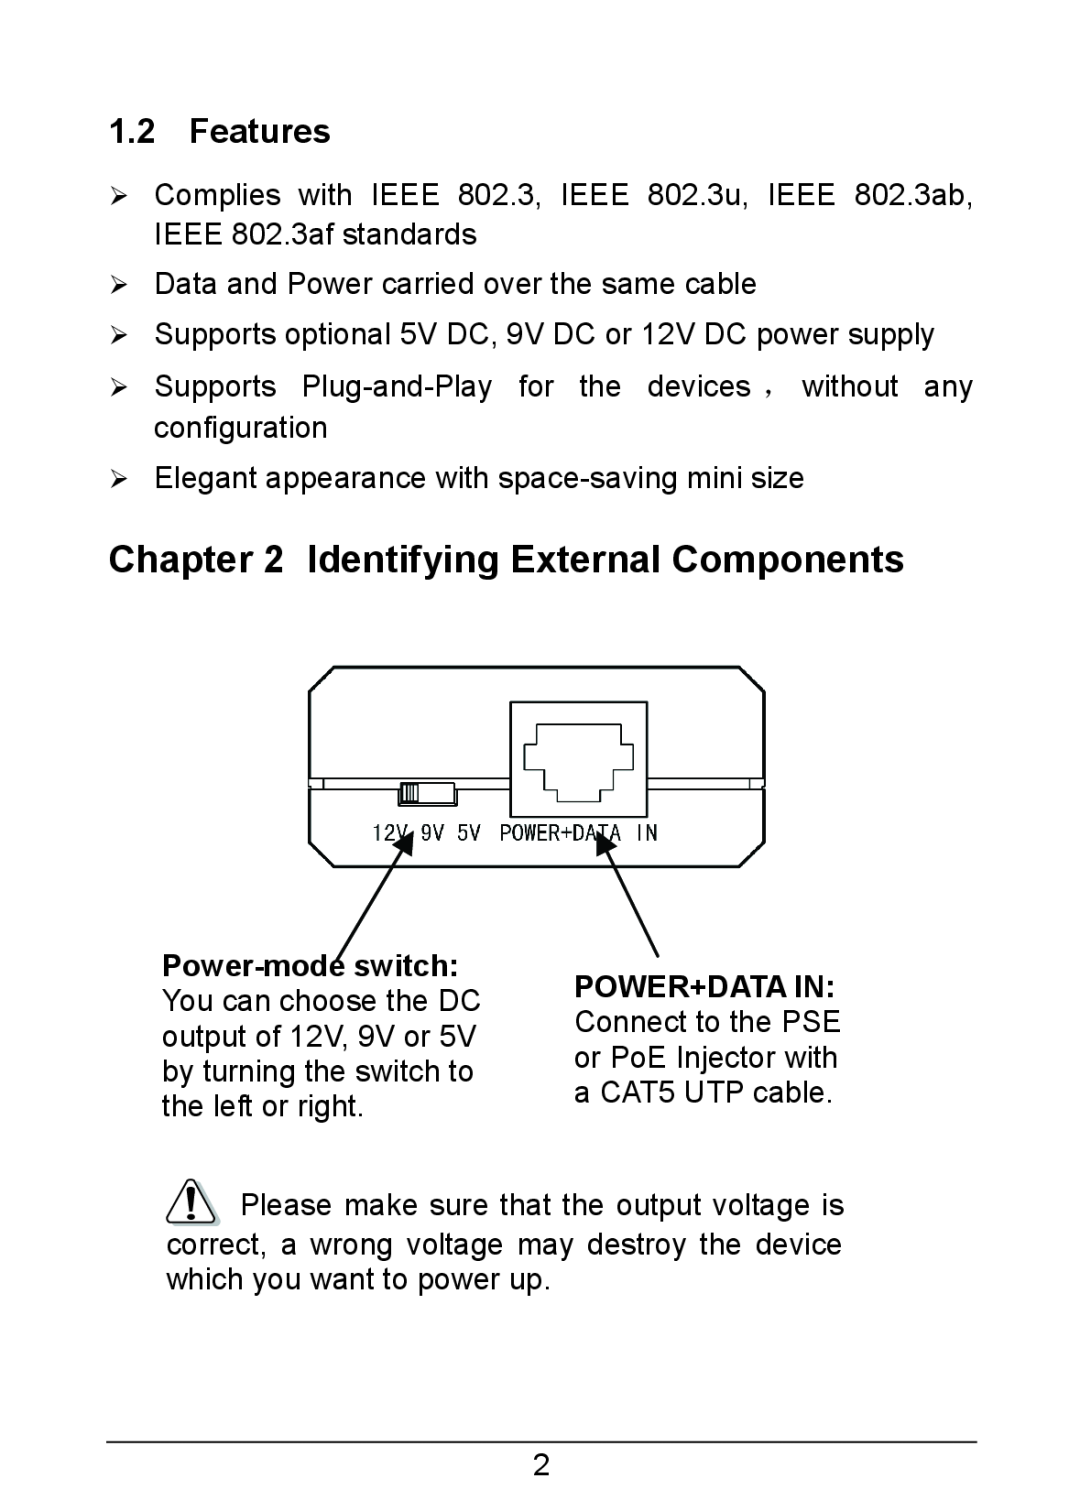 TP-Link TL-POE10R manual Identifying External Components, Features 